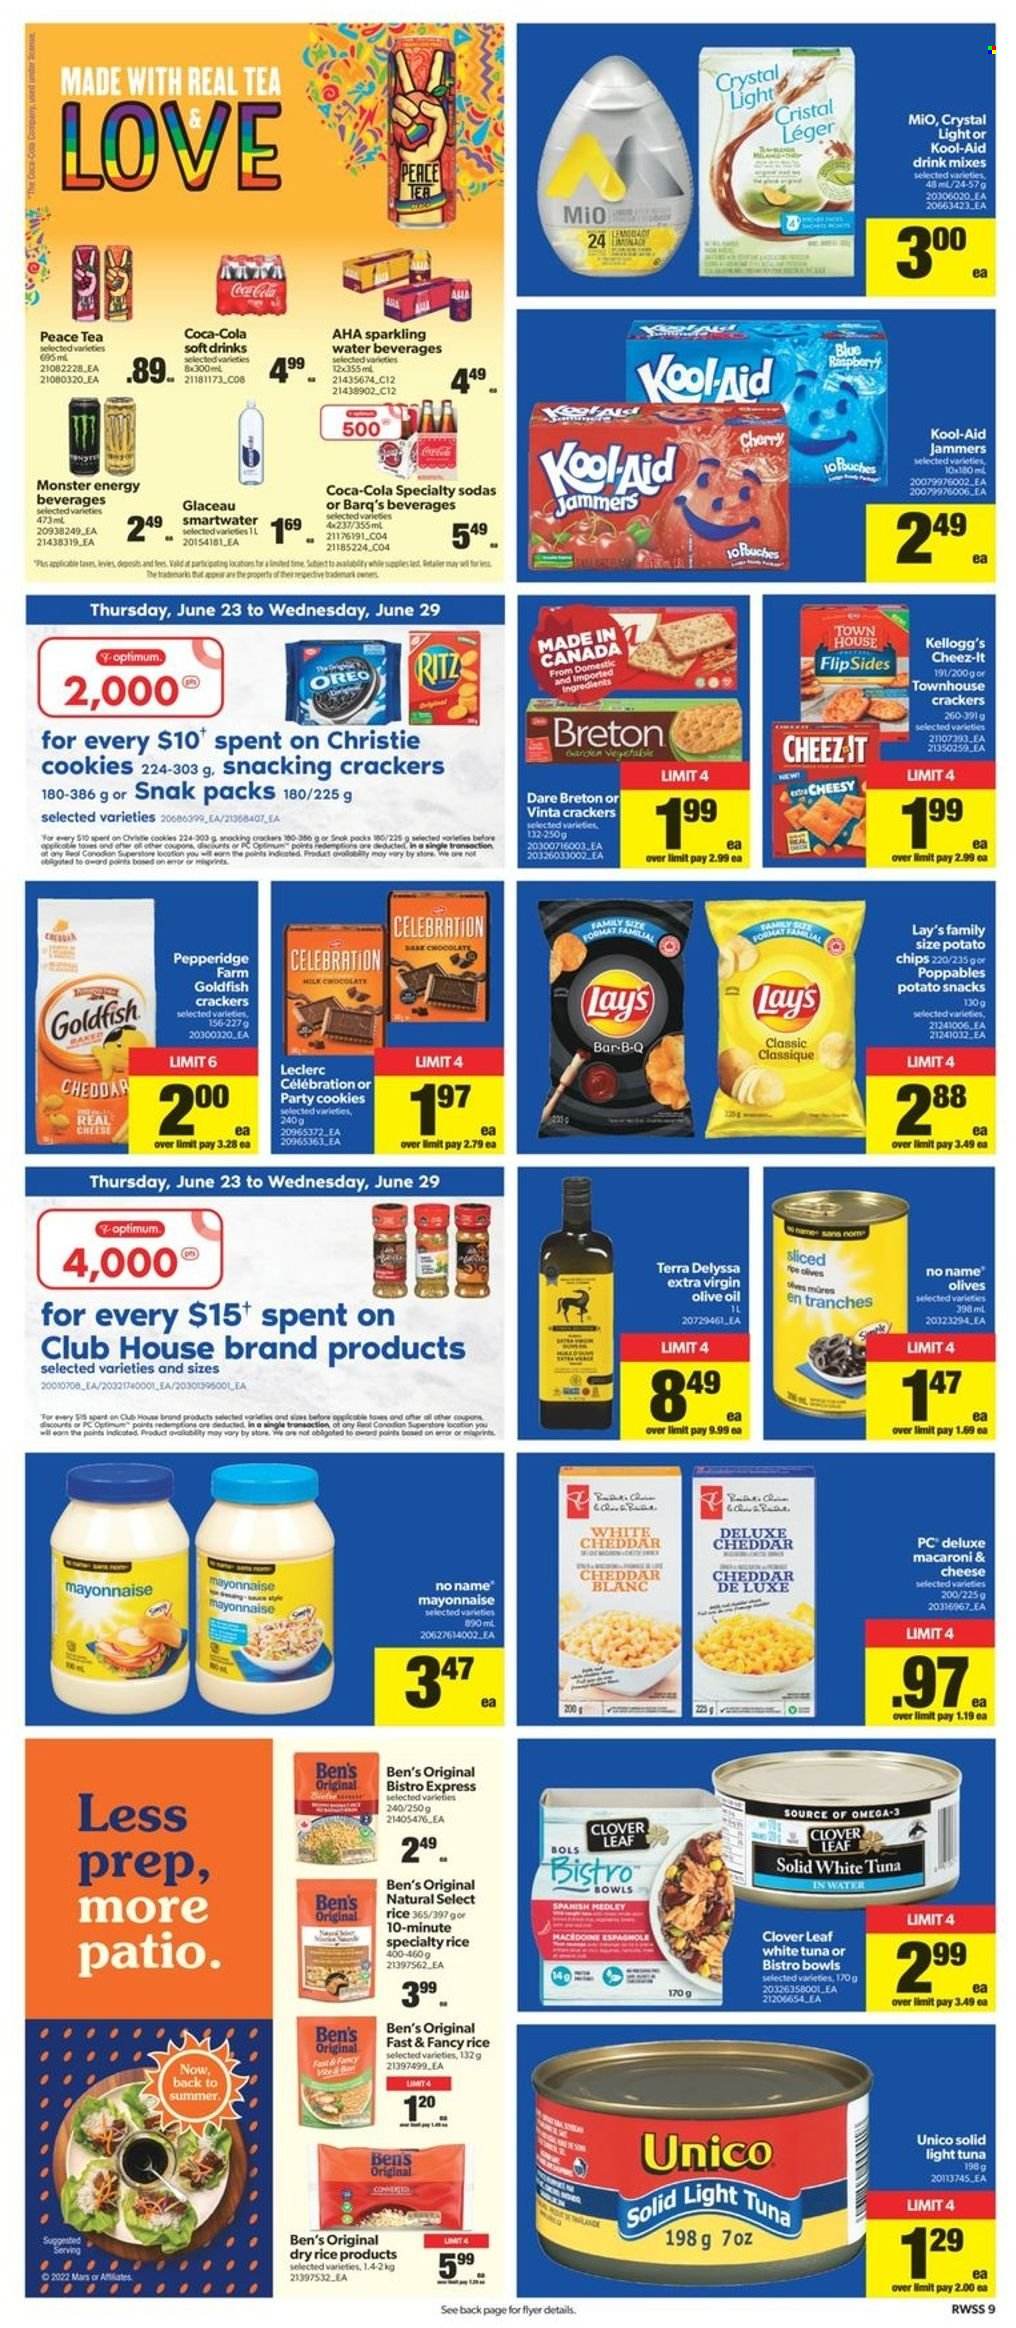 thumbnail - Circulaire Real Canadian Superstore - 23 Juin 2022 - 29 Juin 2022 - Produits soldés - mûres, Oreo, mayonnaise, Kellogg's, cookies, chips, crackers, Lay’s, olives, pâtes, macaroni, Coca-Cola, Monster. Page 10.